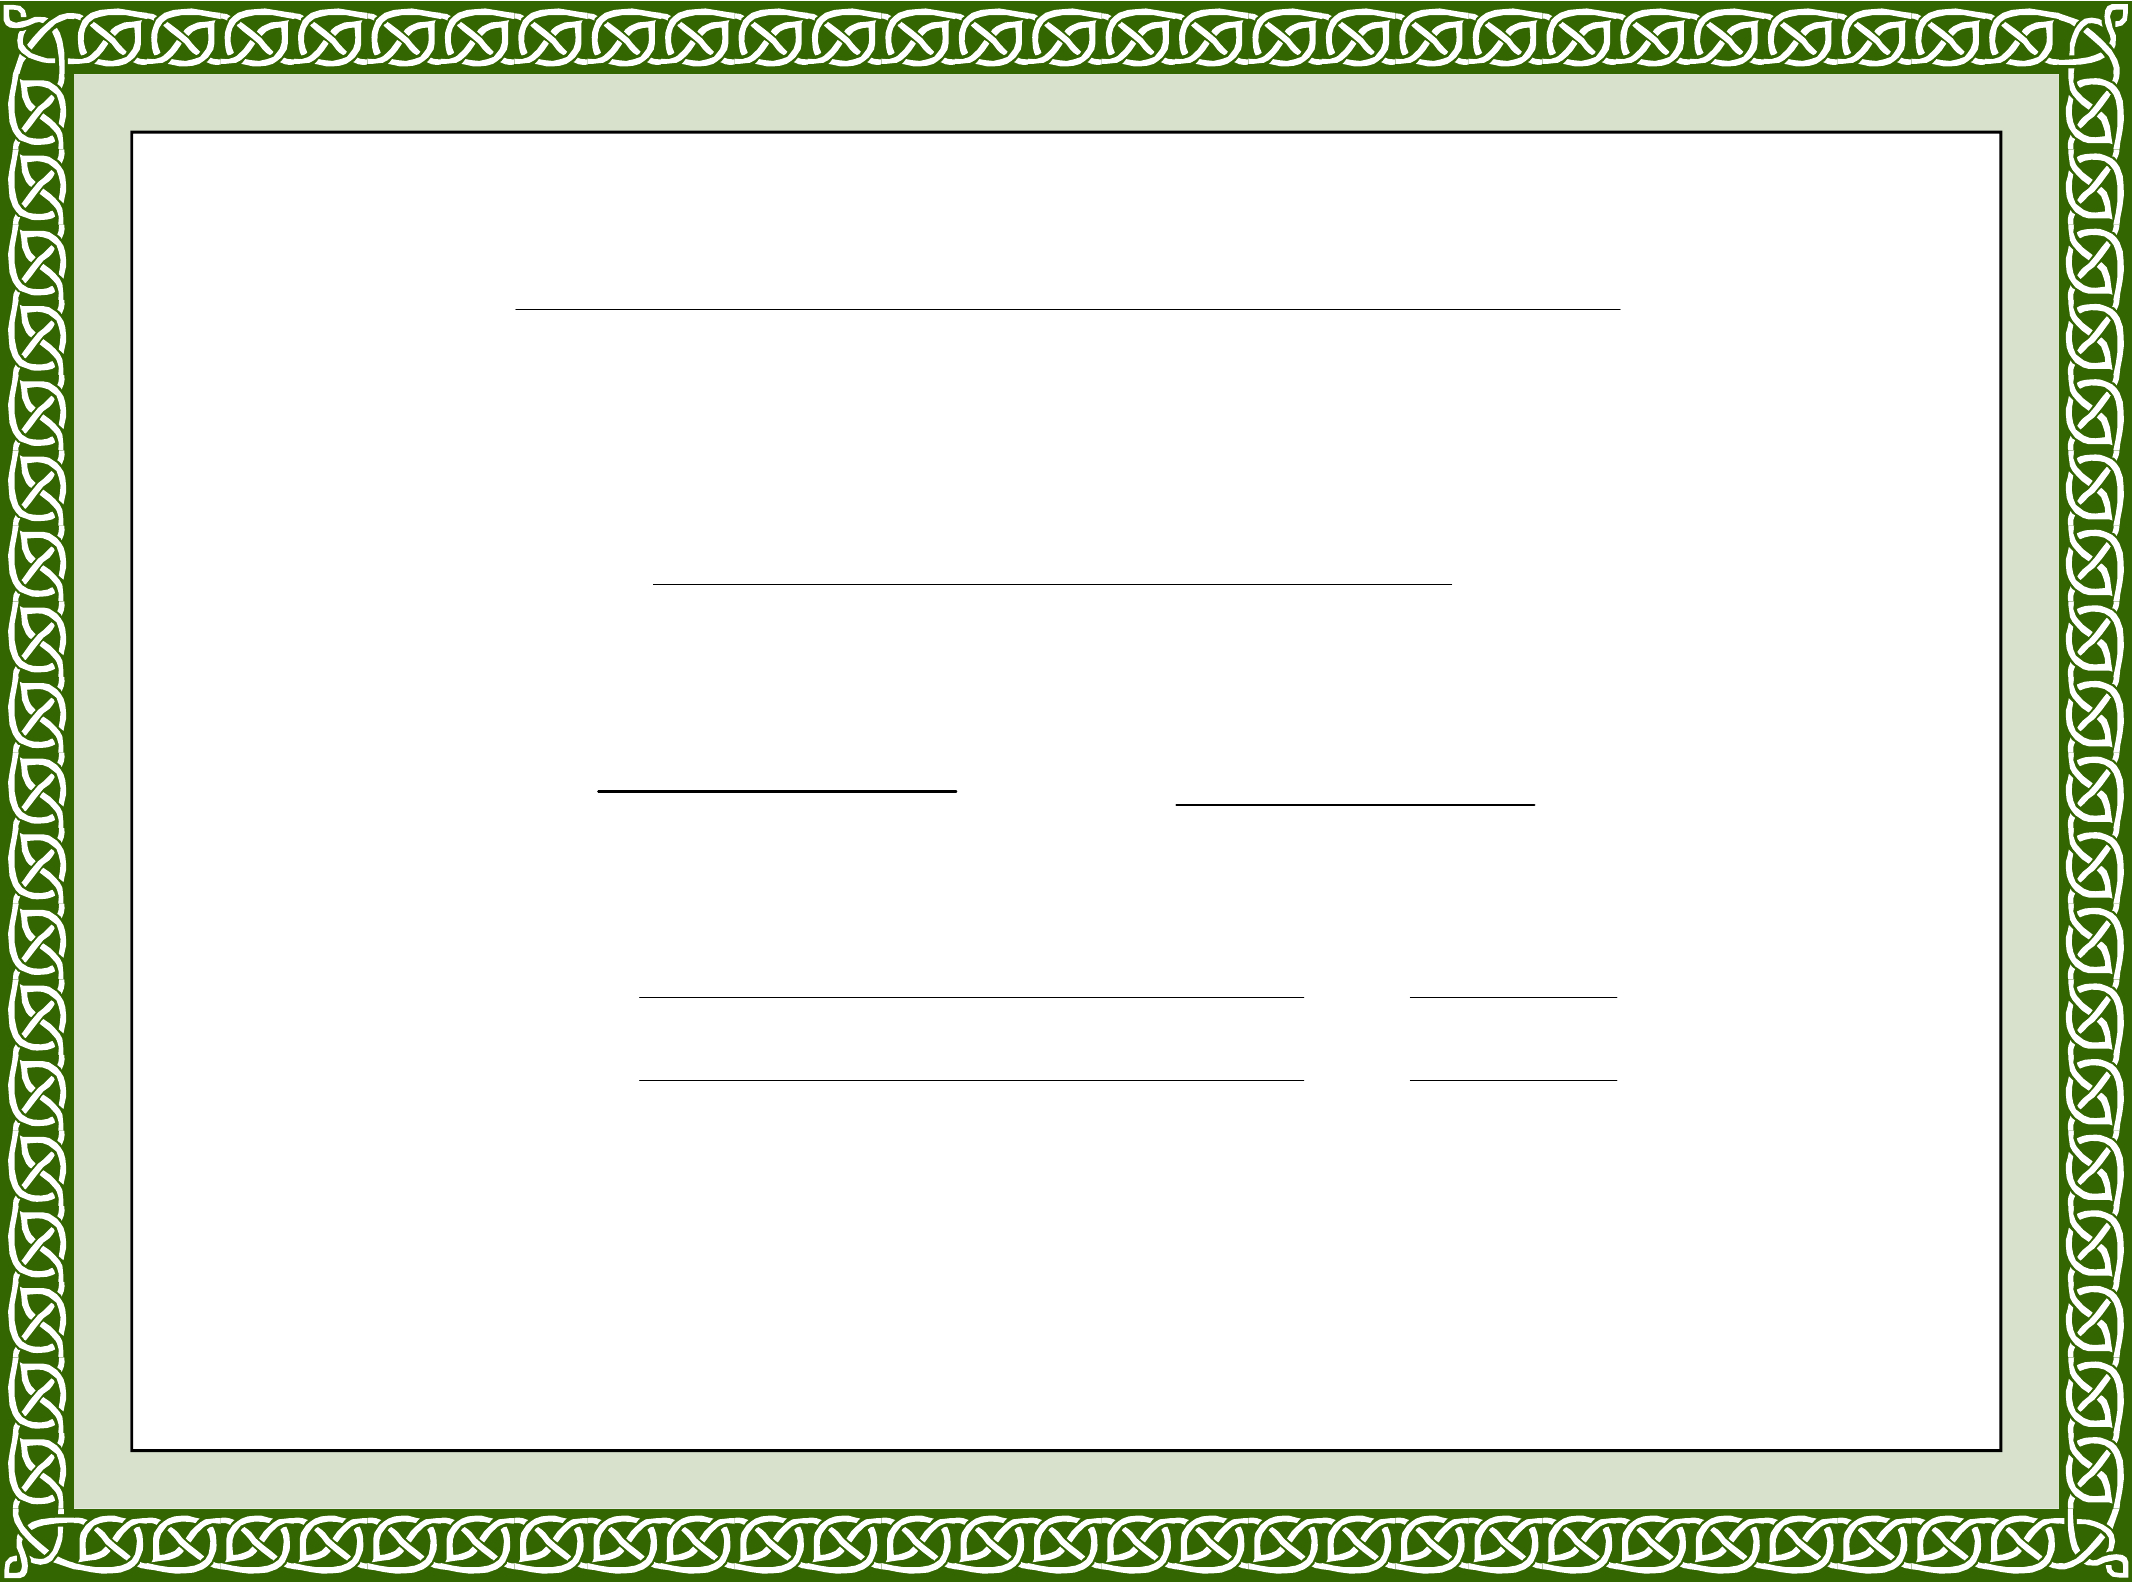 Training Certificate Template Free Download – Calep Intended For Blank Certificate Templates Free Download